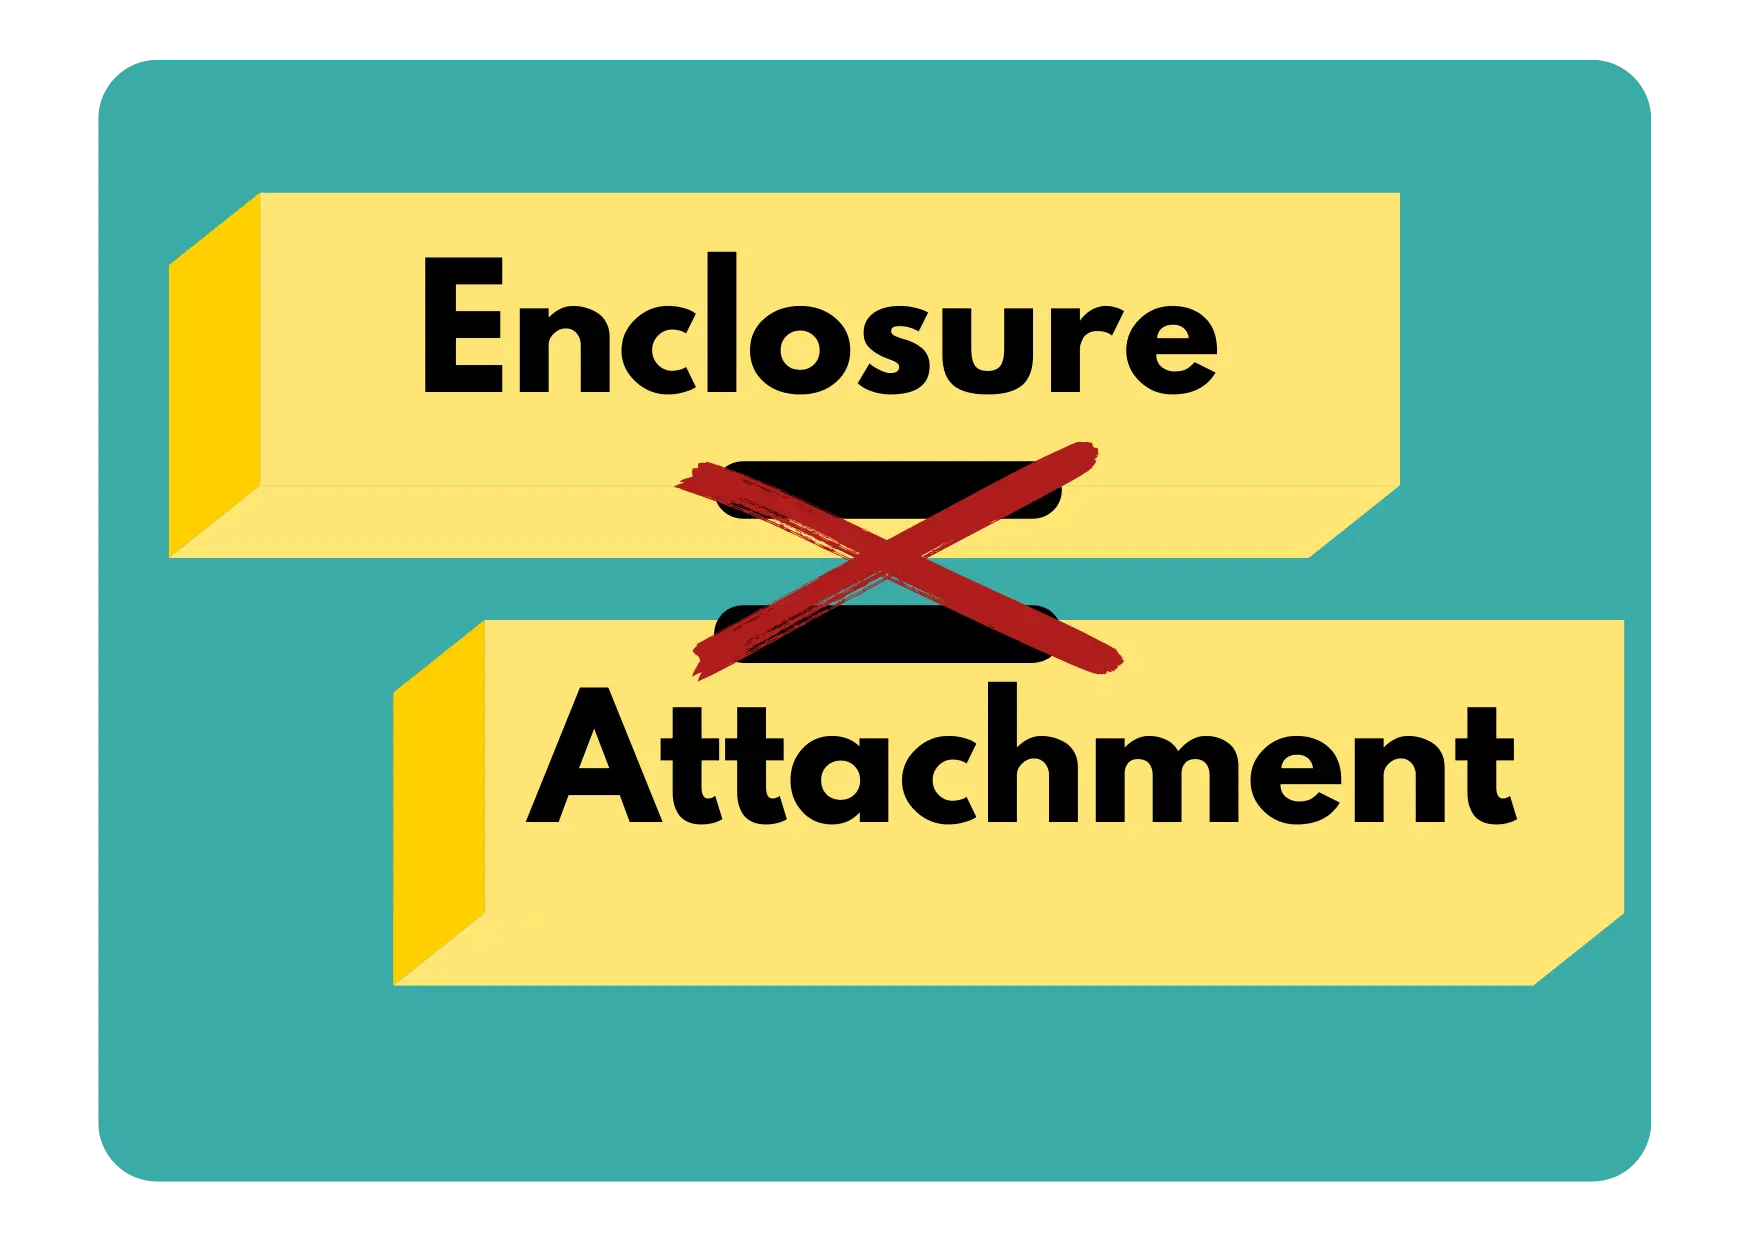 Image showing that Enclosure does not equal attachment